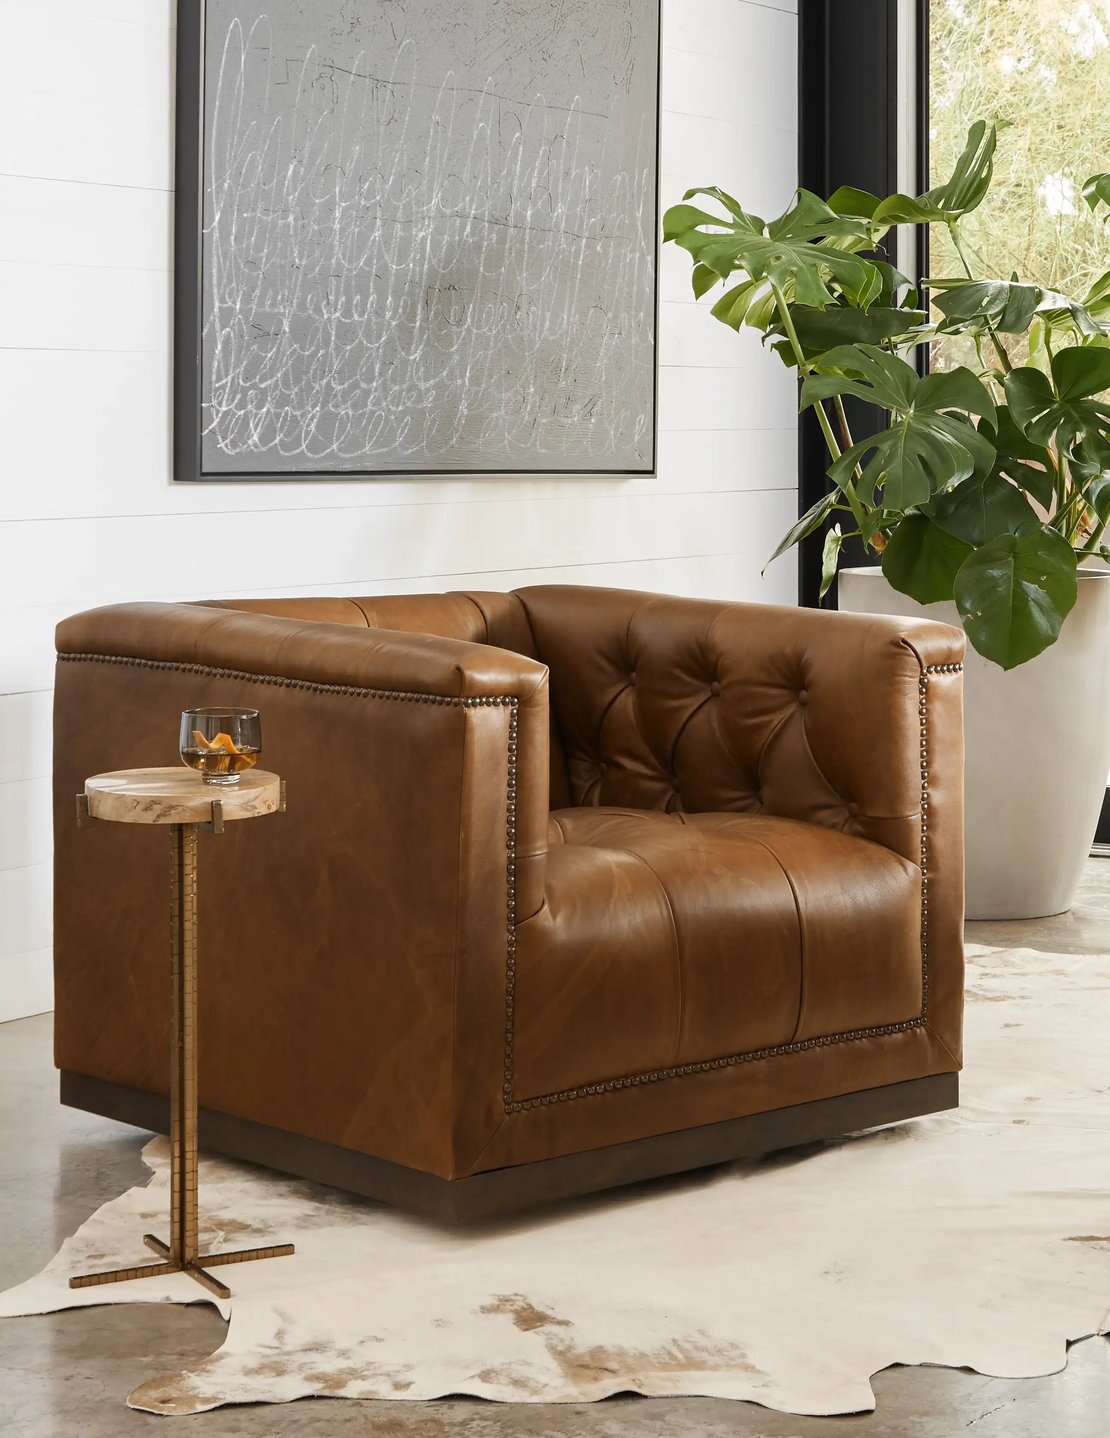 Leather arm chair next to a small brass and marble side table.